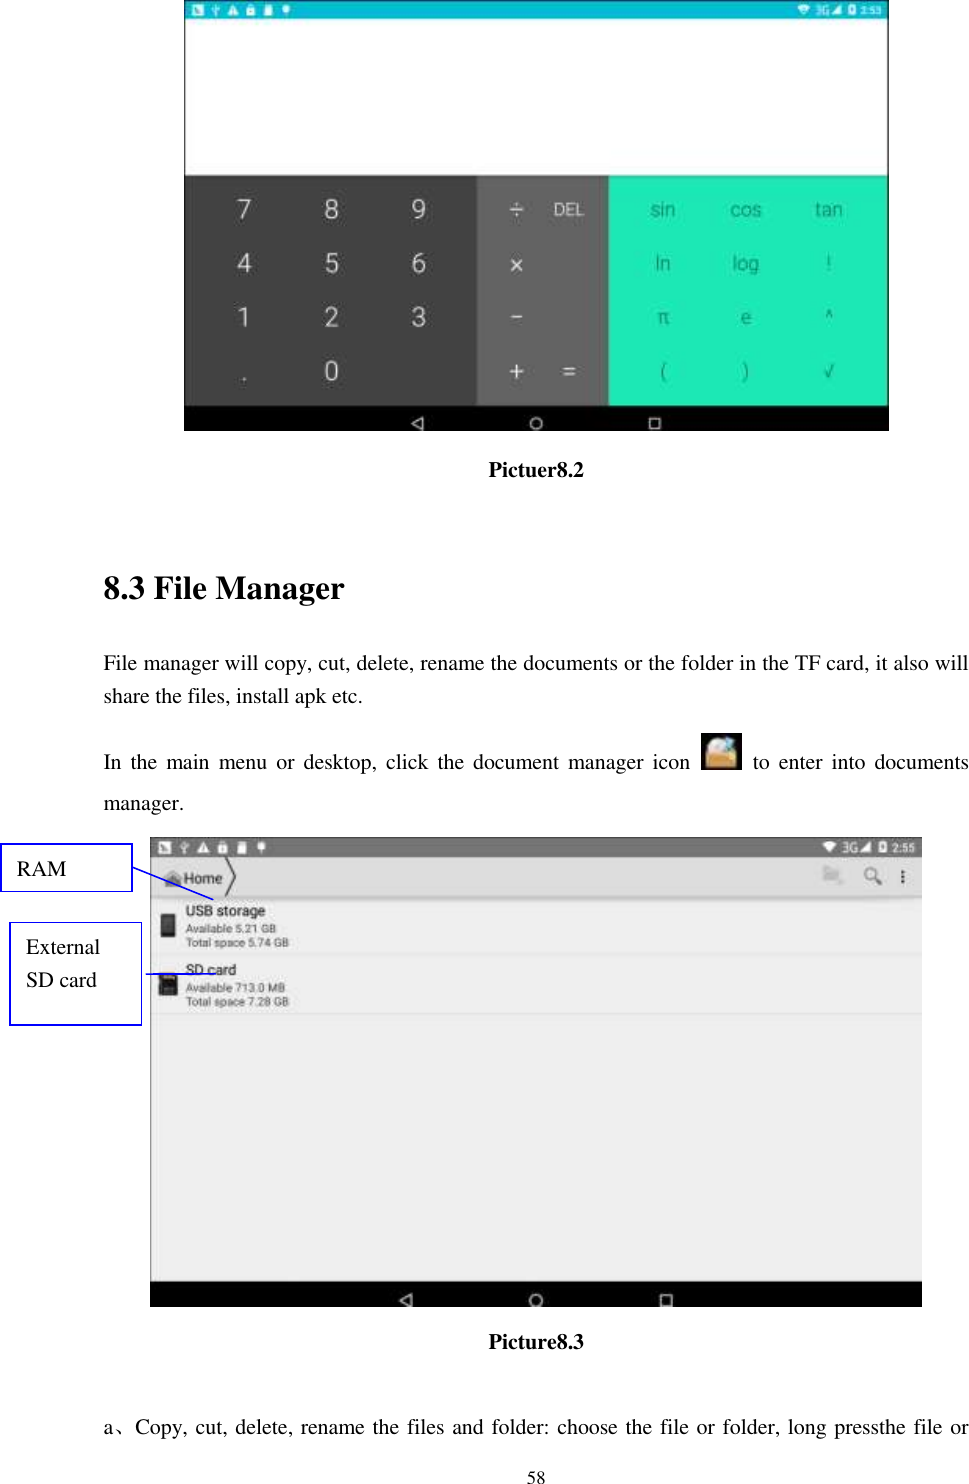      58  Pictuer8.2  8.3 File Manager File manager will copy, cut, delete, rename the documents or the folder in the TF card, it also will share the files, install apk etc. In the  main  menu  or  desktop,  click the  document manager icon    to  enter  into  documents manager.  Picture8.3  a、Copy, cut, delete, rename the files and folder: choose the file or folder, long pressthe file or RAM  External SD card 